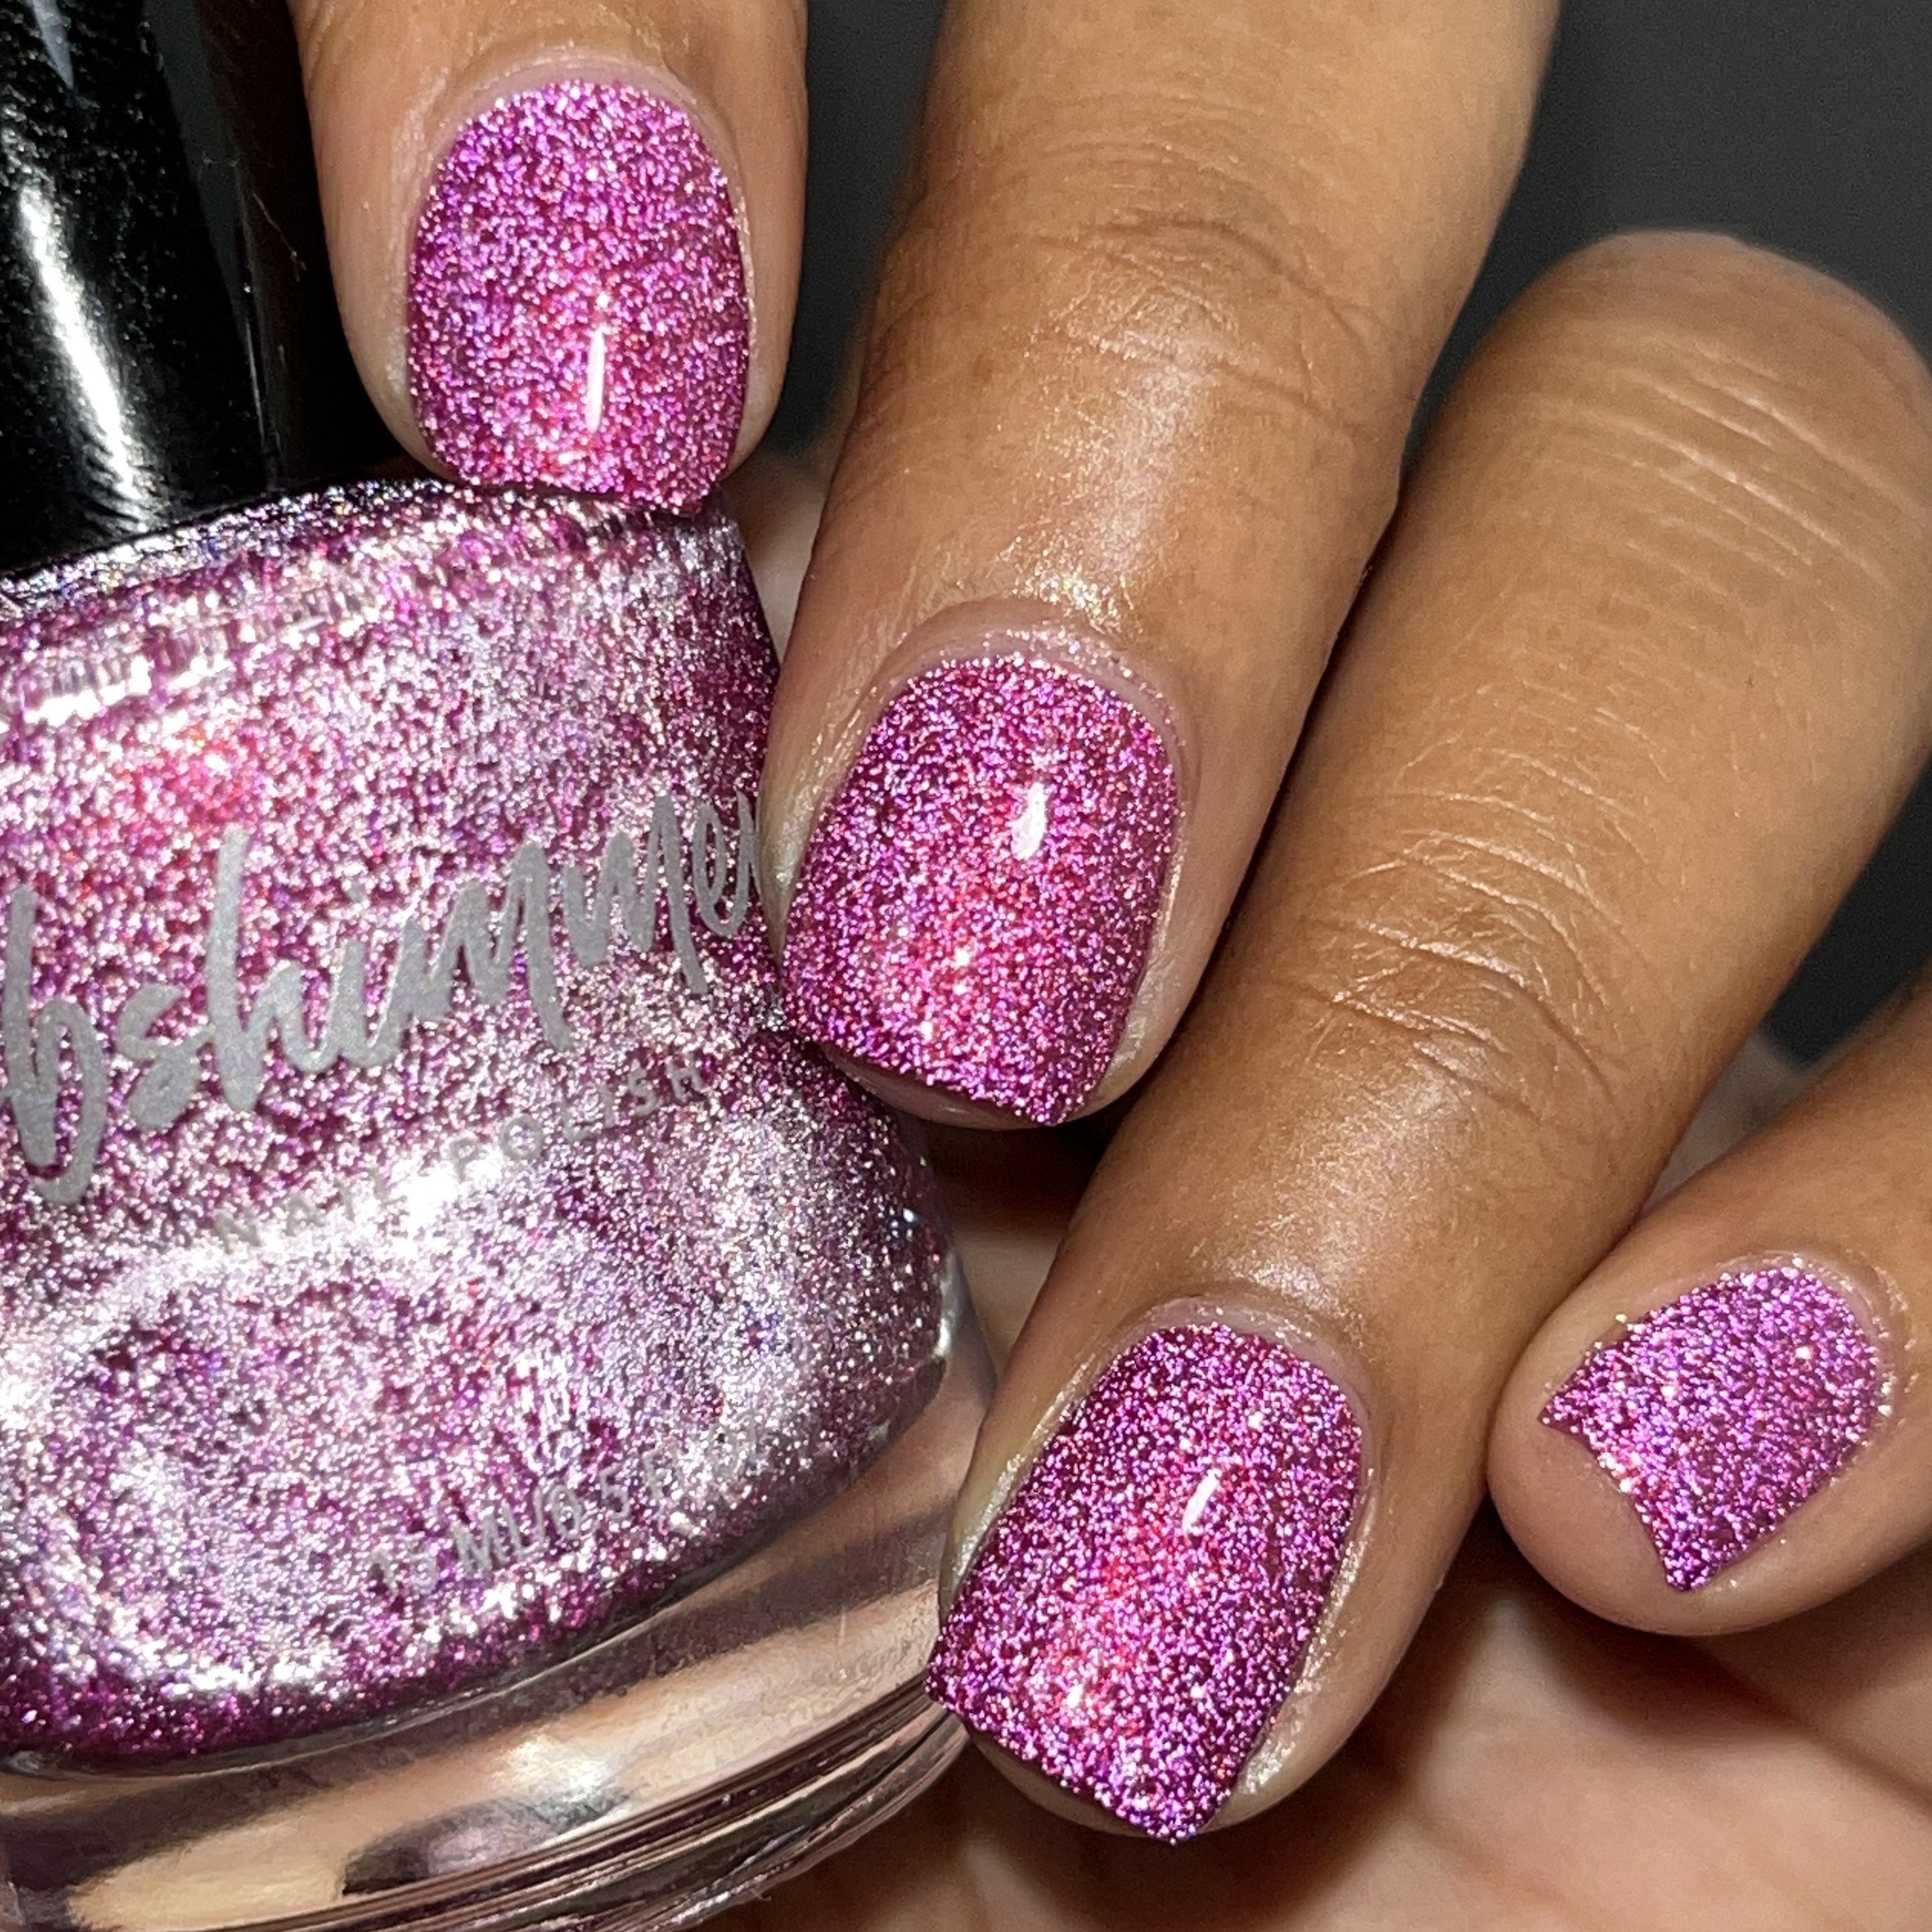 There's A Nap For That Reflective Nail Polish By KBShimmer